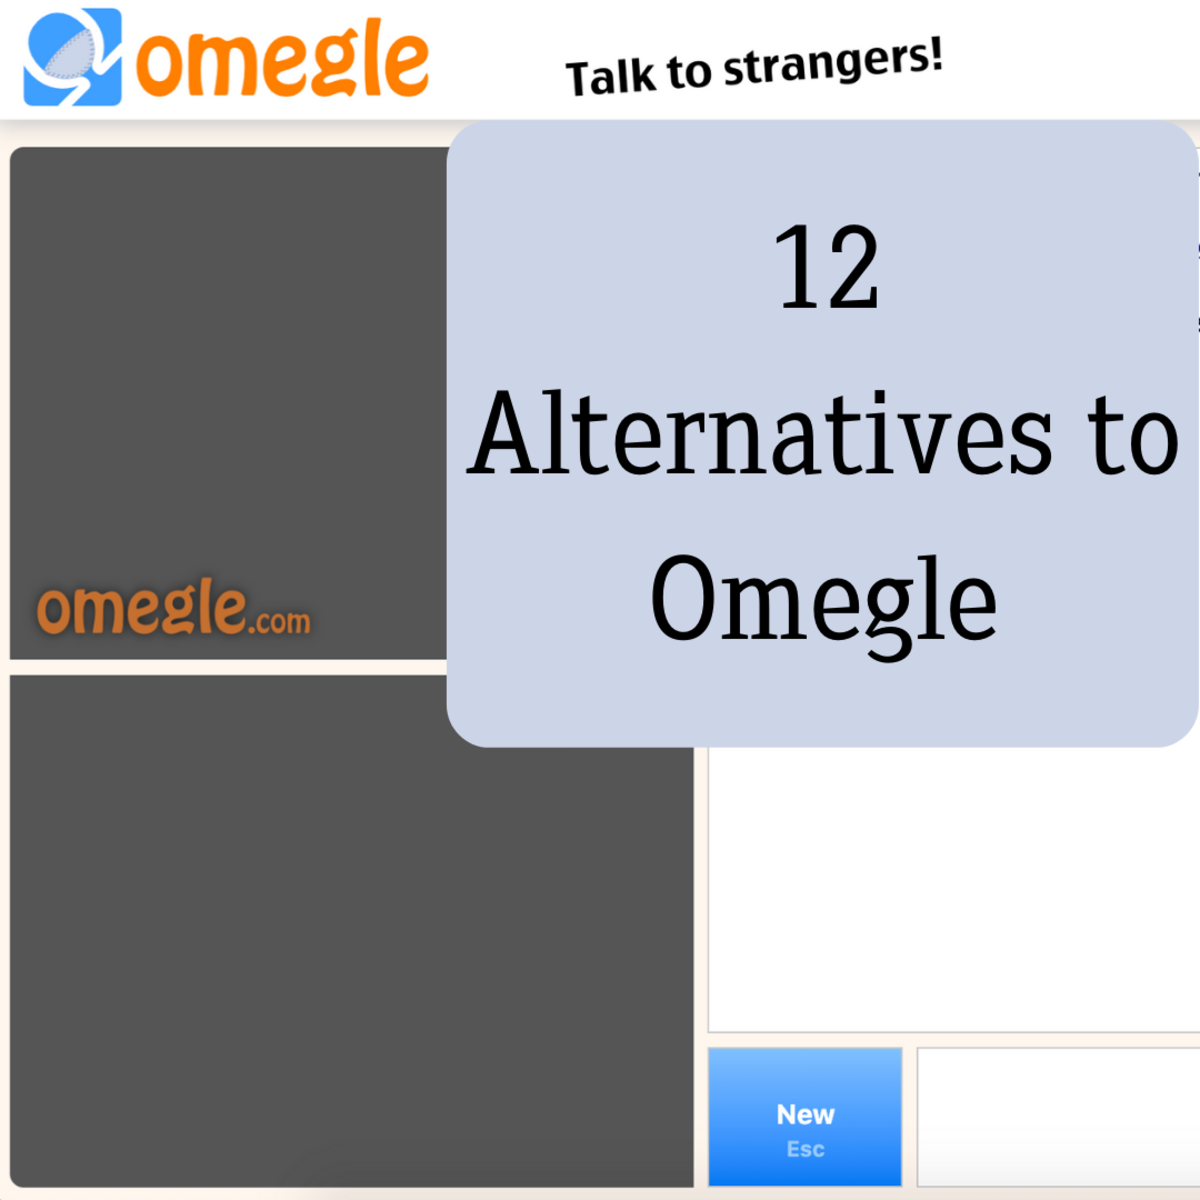 Is omegle com what How to